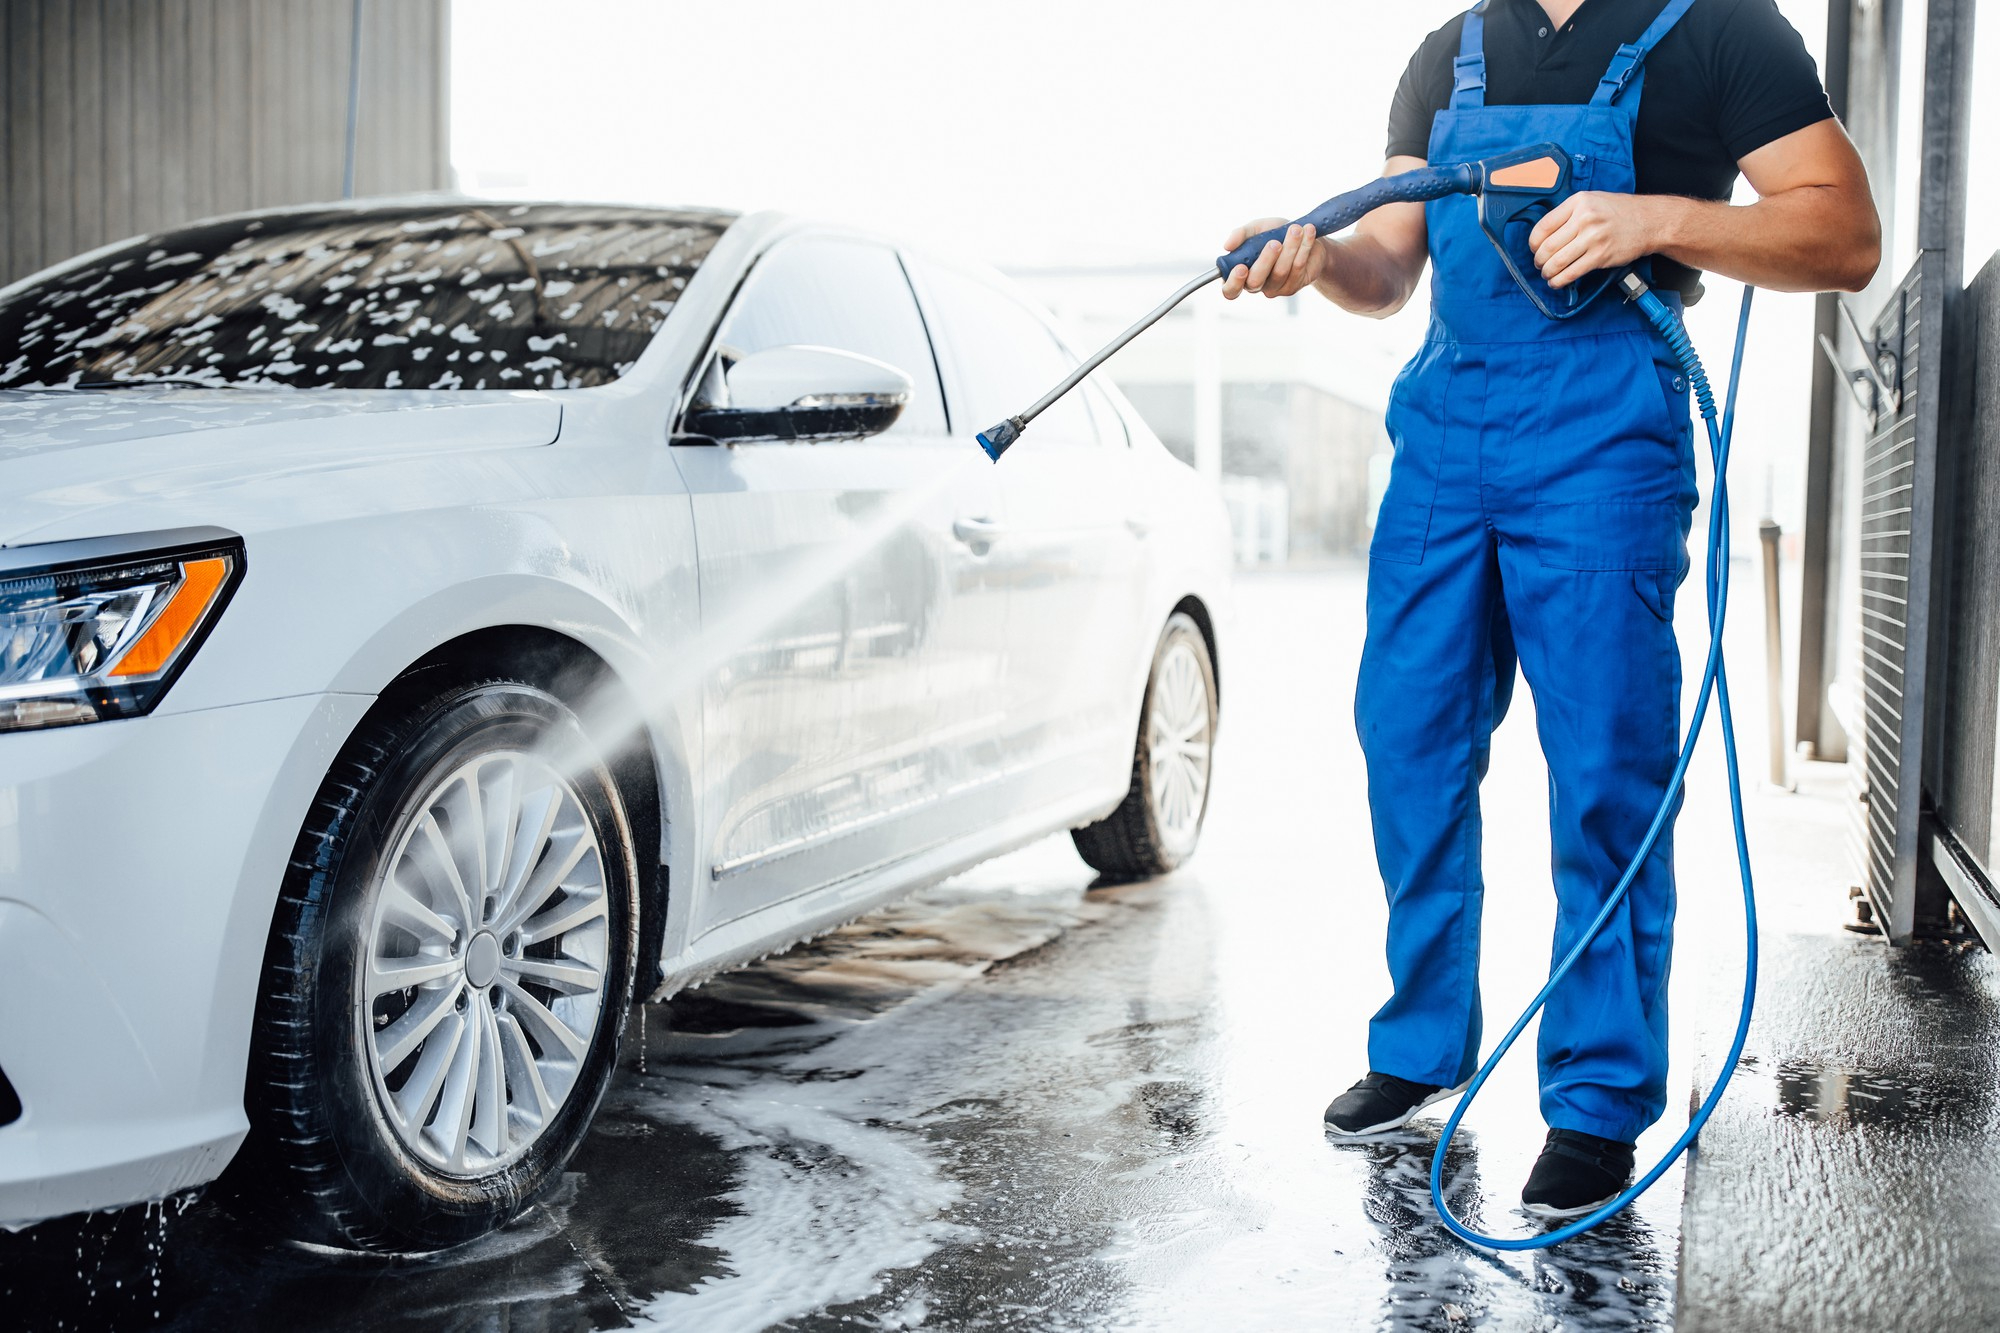 A car being cleaned at a car wash | Source: Freepik